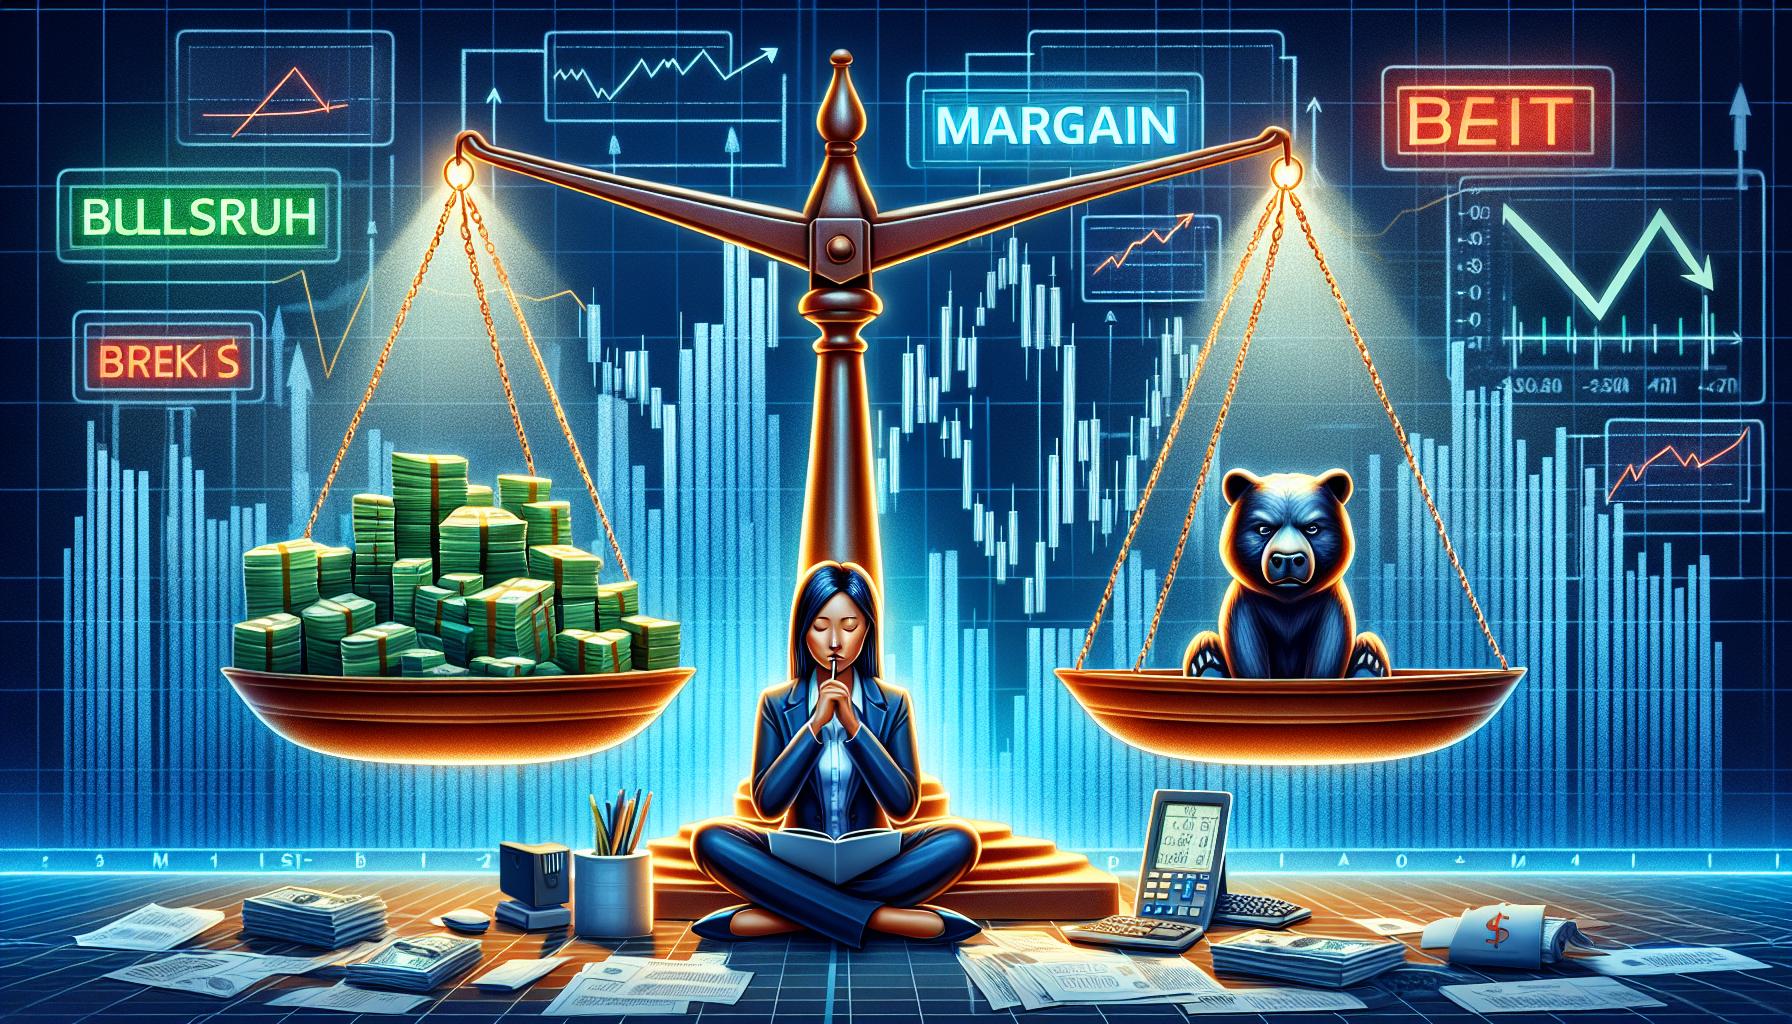 Create an image that visually represents the concept of a margin brokerage account. Include elements like a balance scale to signify weighing benefits and risks, with one side showing stacks of cash, stock market graphs, and a bull market symbol, while the other side shows warning signs, debt papers, and a bear market symbol. The background can be a financial office setting with charts and computers, and a person contemplating at the center of the image, showcasing decision-making and analysis.